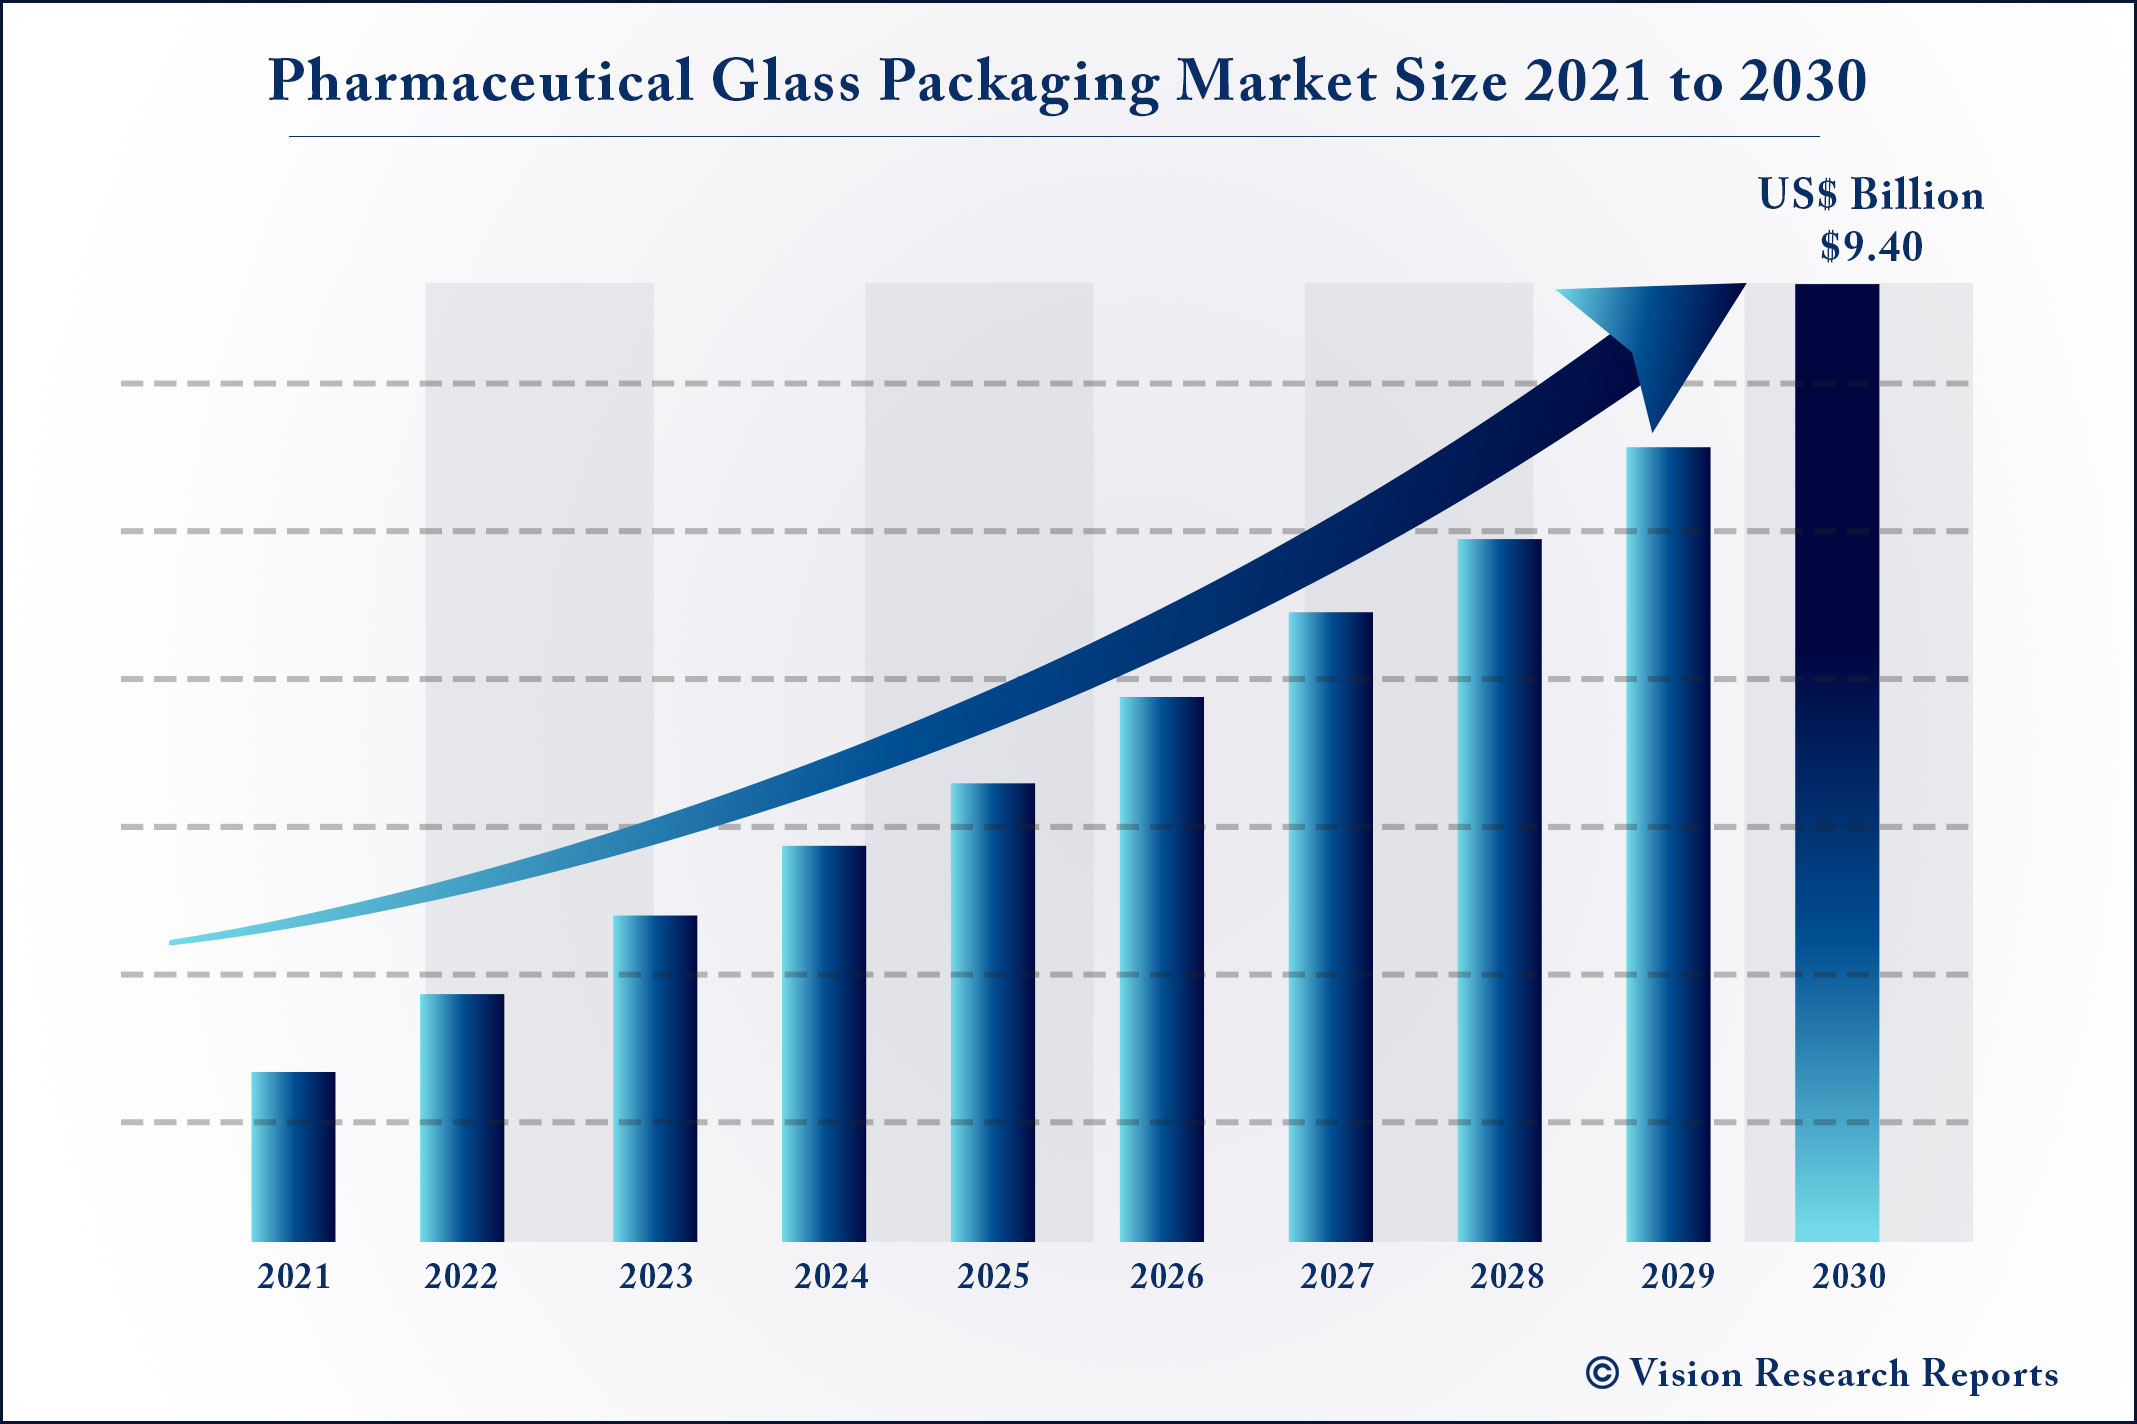 Pharmaceutical Glass Packaging Market Size 2021 to 2030